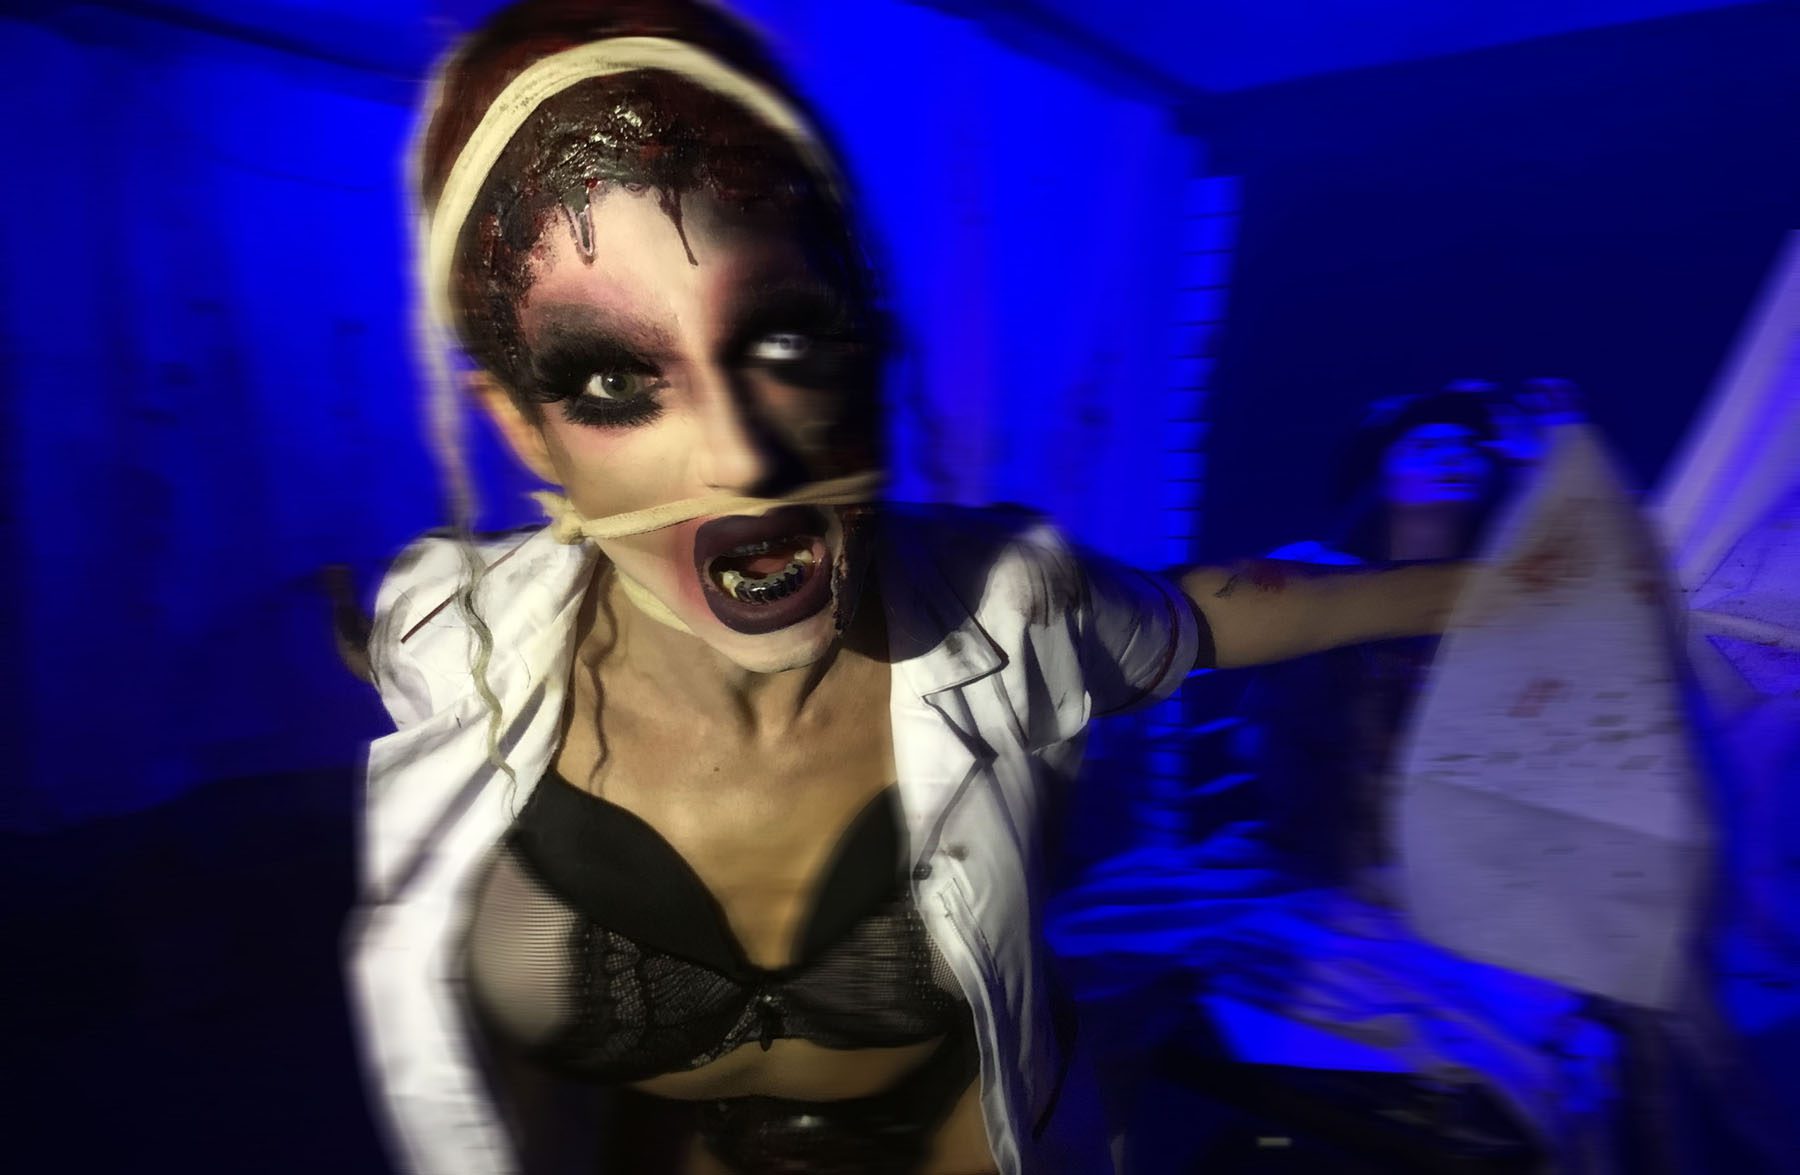 scare performer